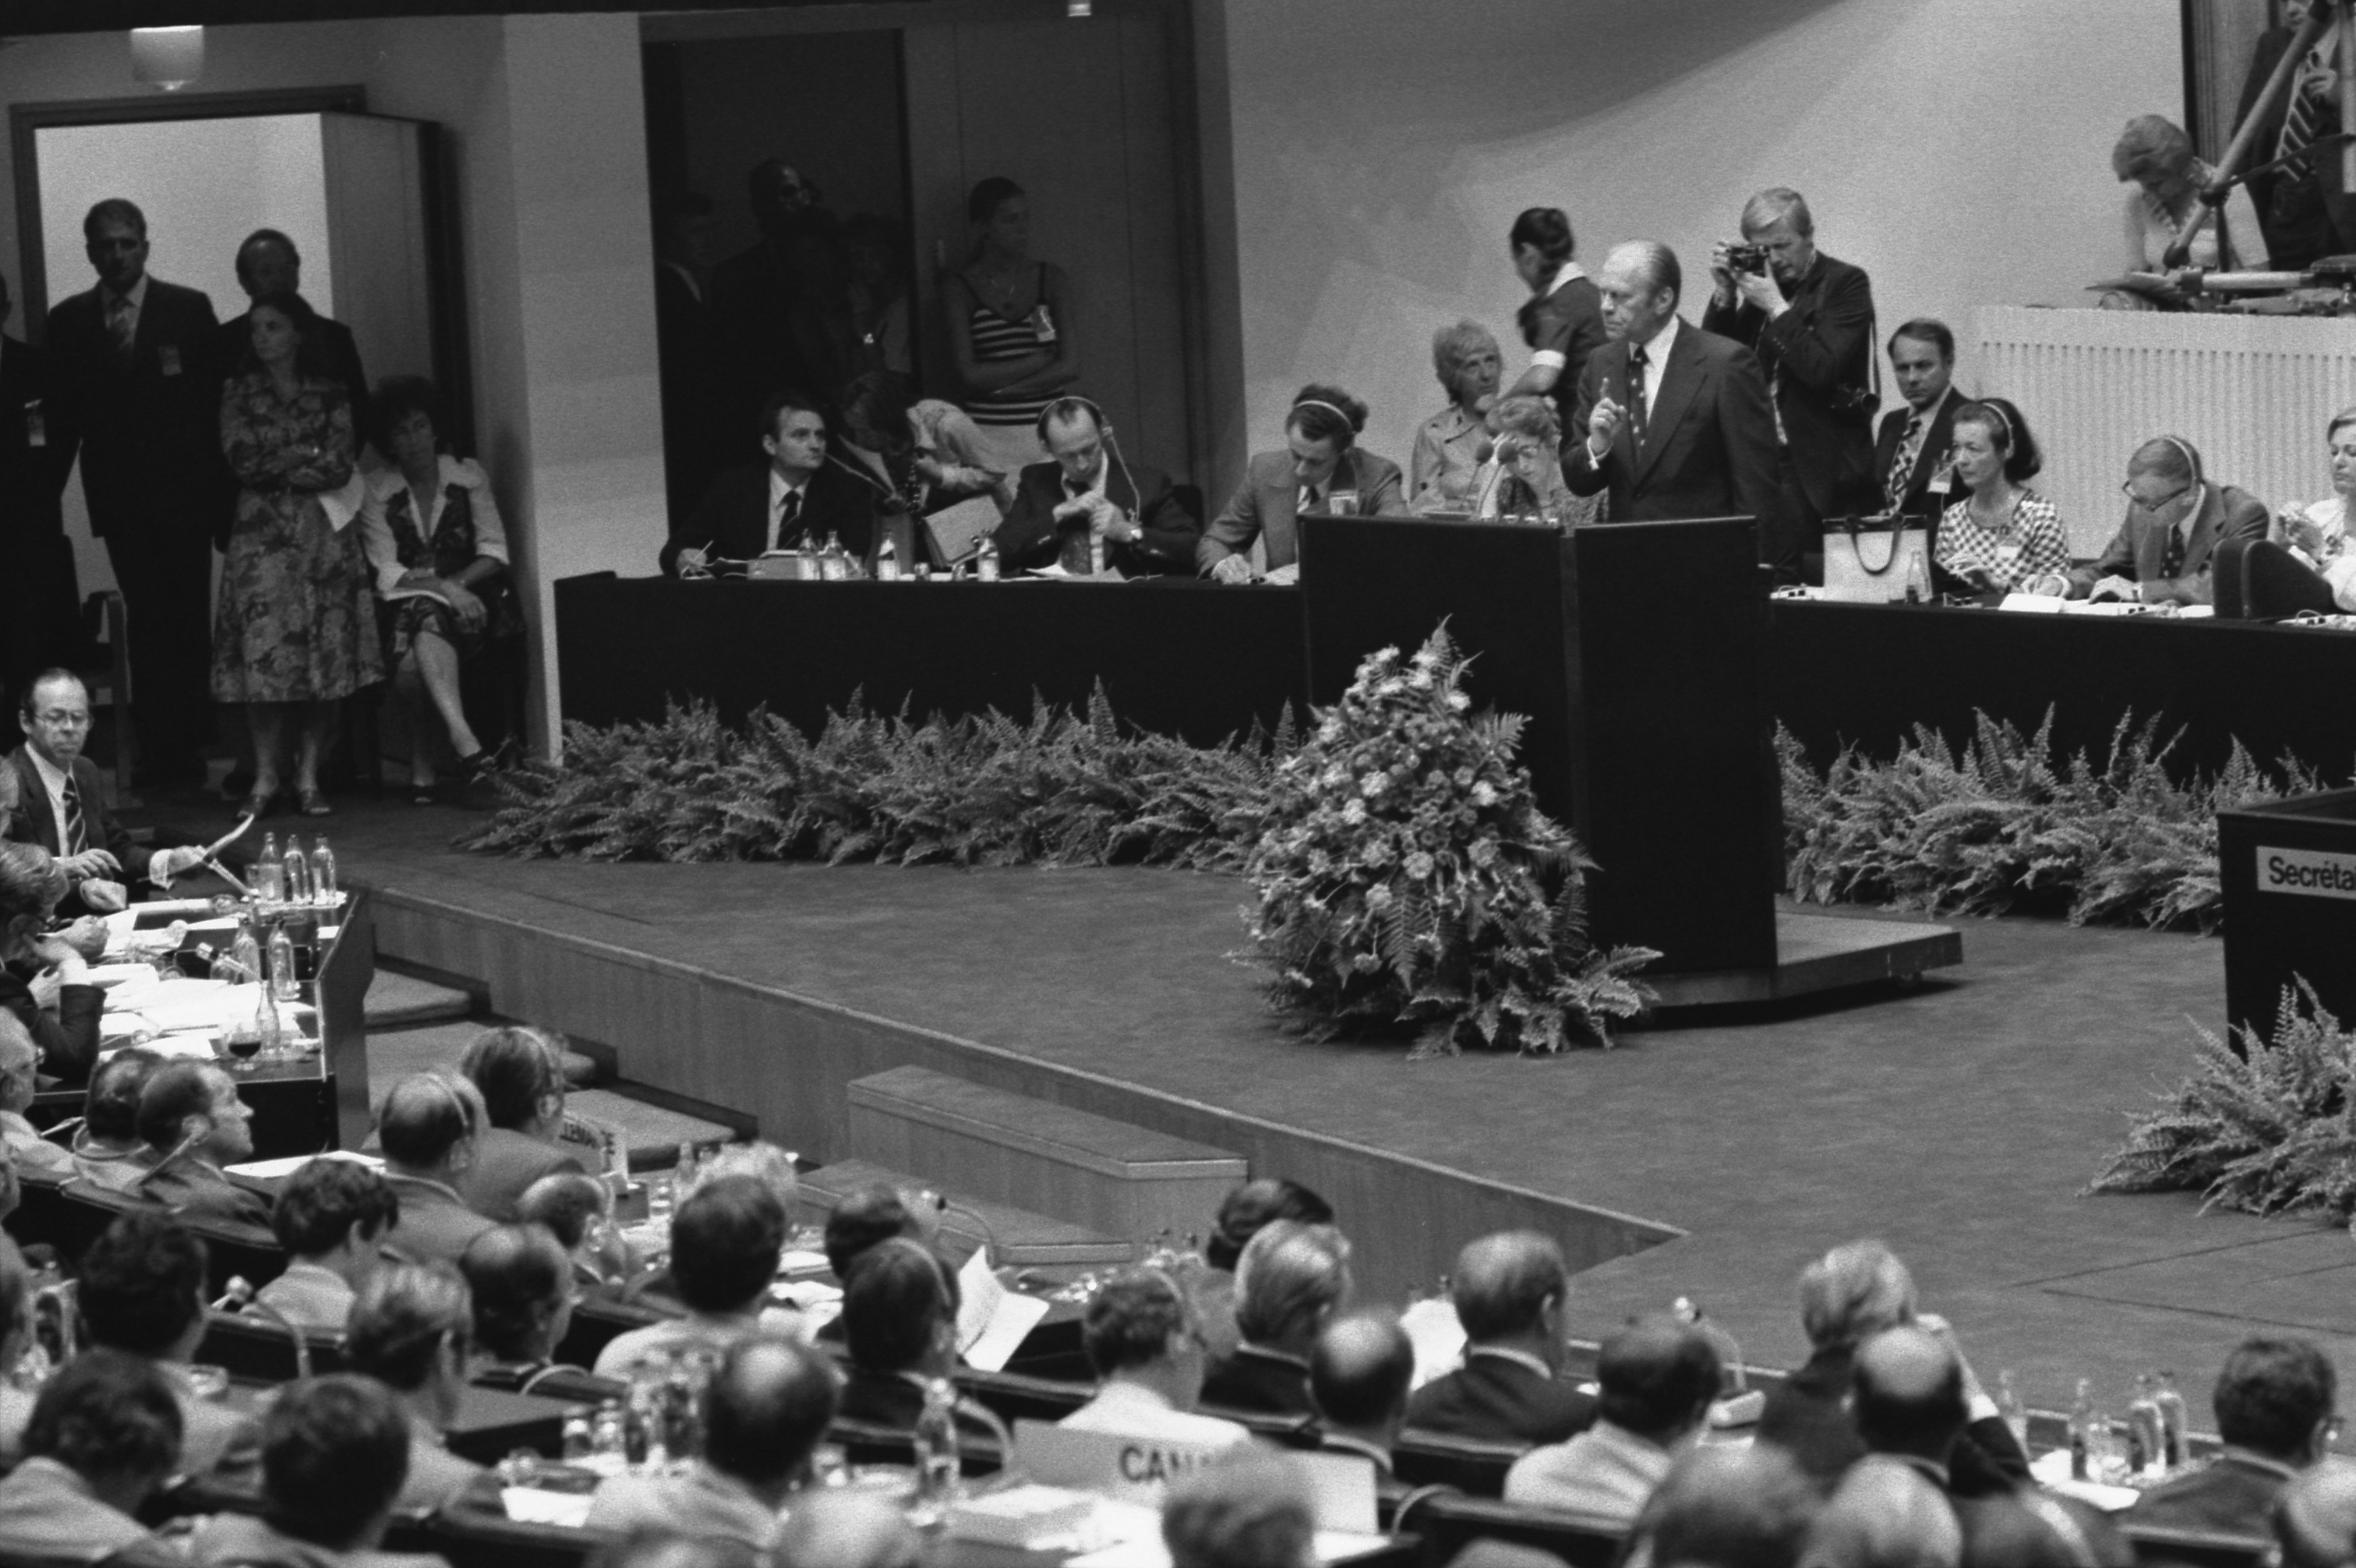 President Ford Addressing Del../egates during the Plenary Session of the Conference on Security and Cooperation in Europe (CSCE) in Finlandia Hall in Helsinki, Finland, 8/1/1975